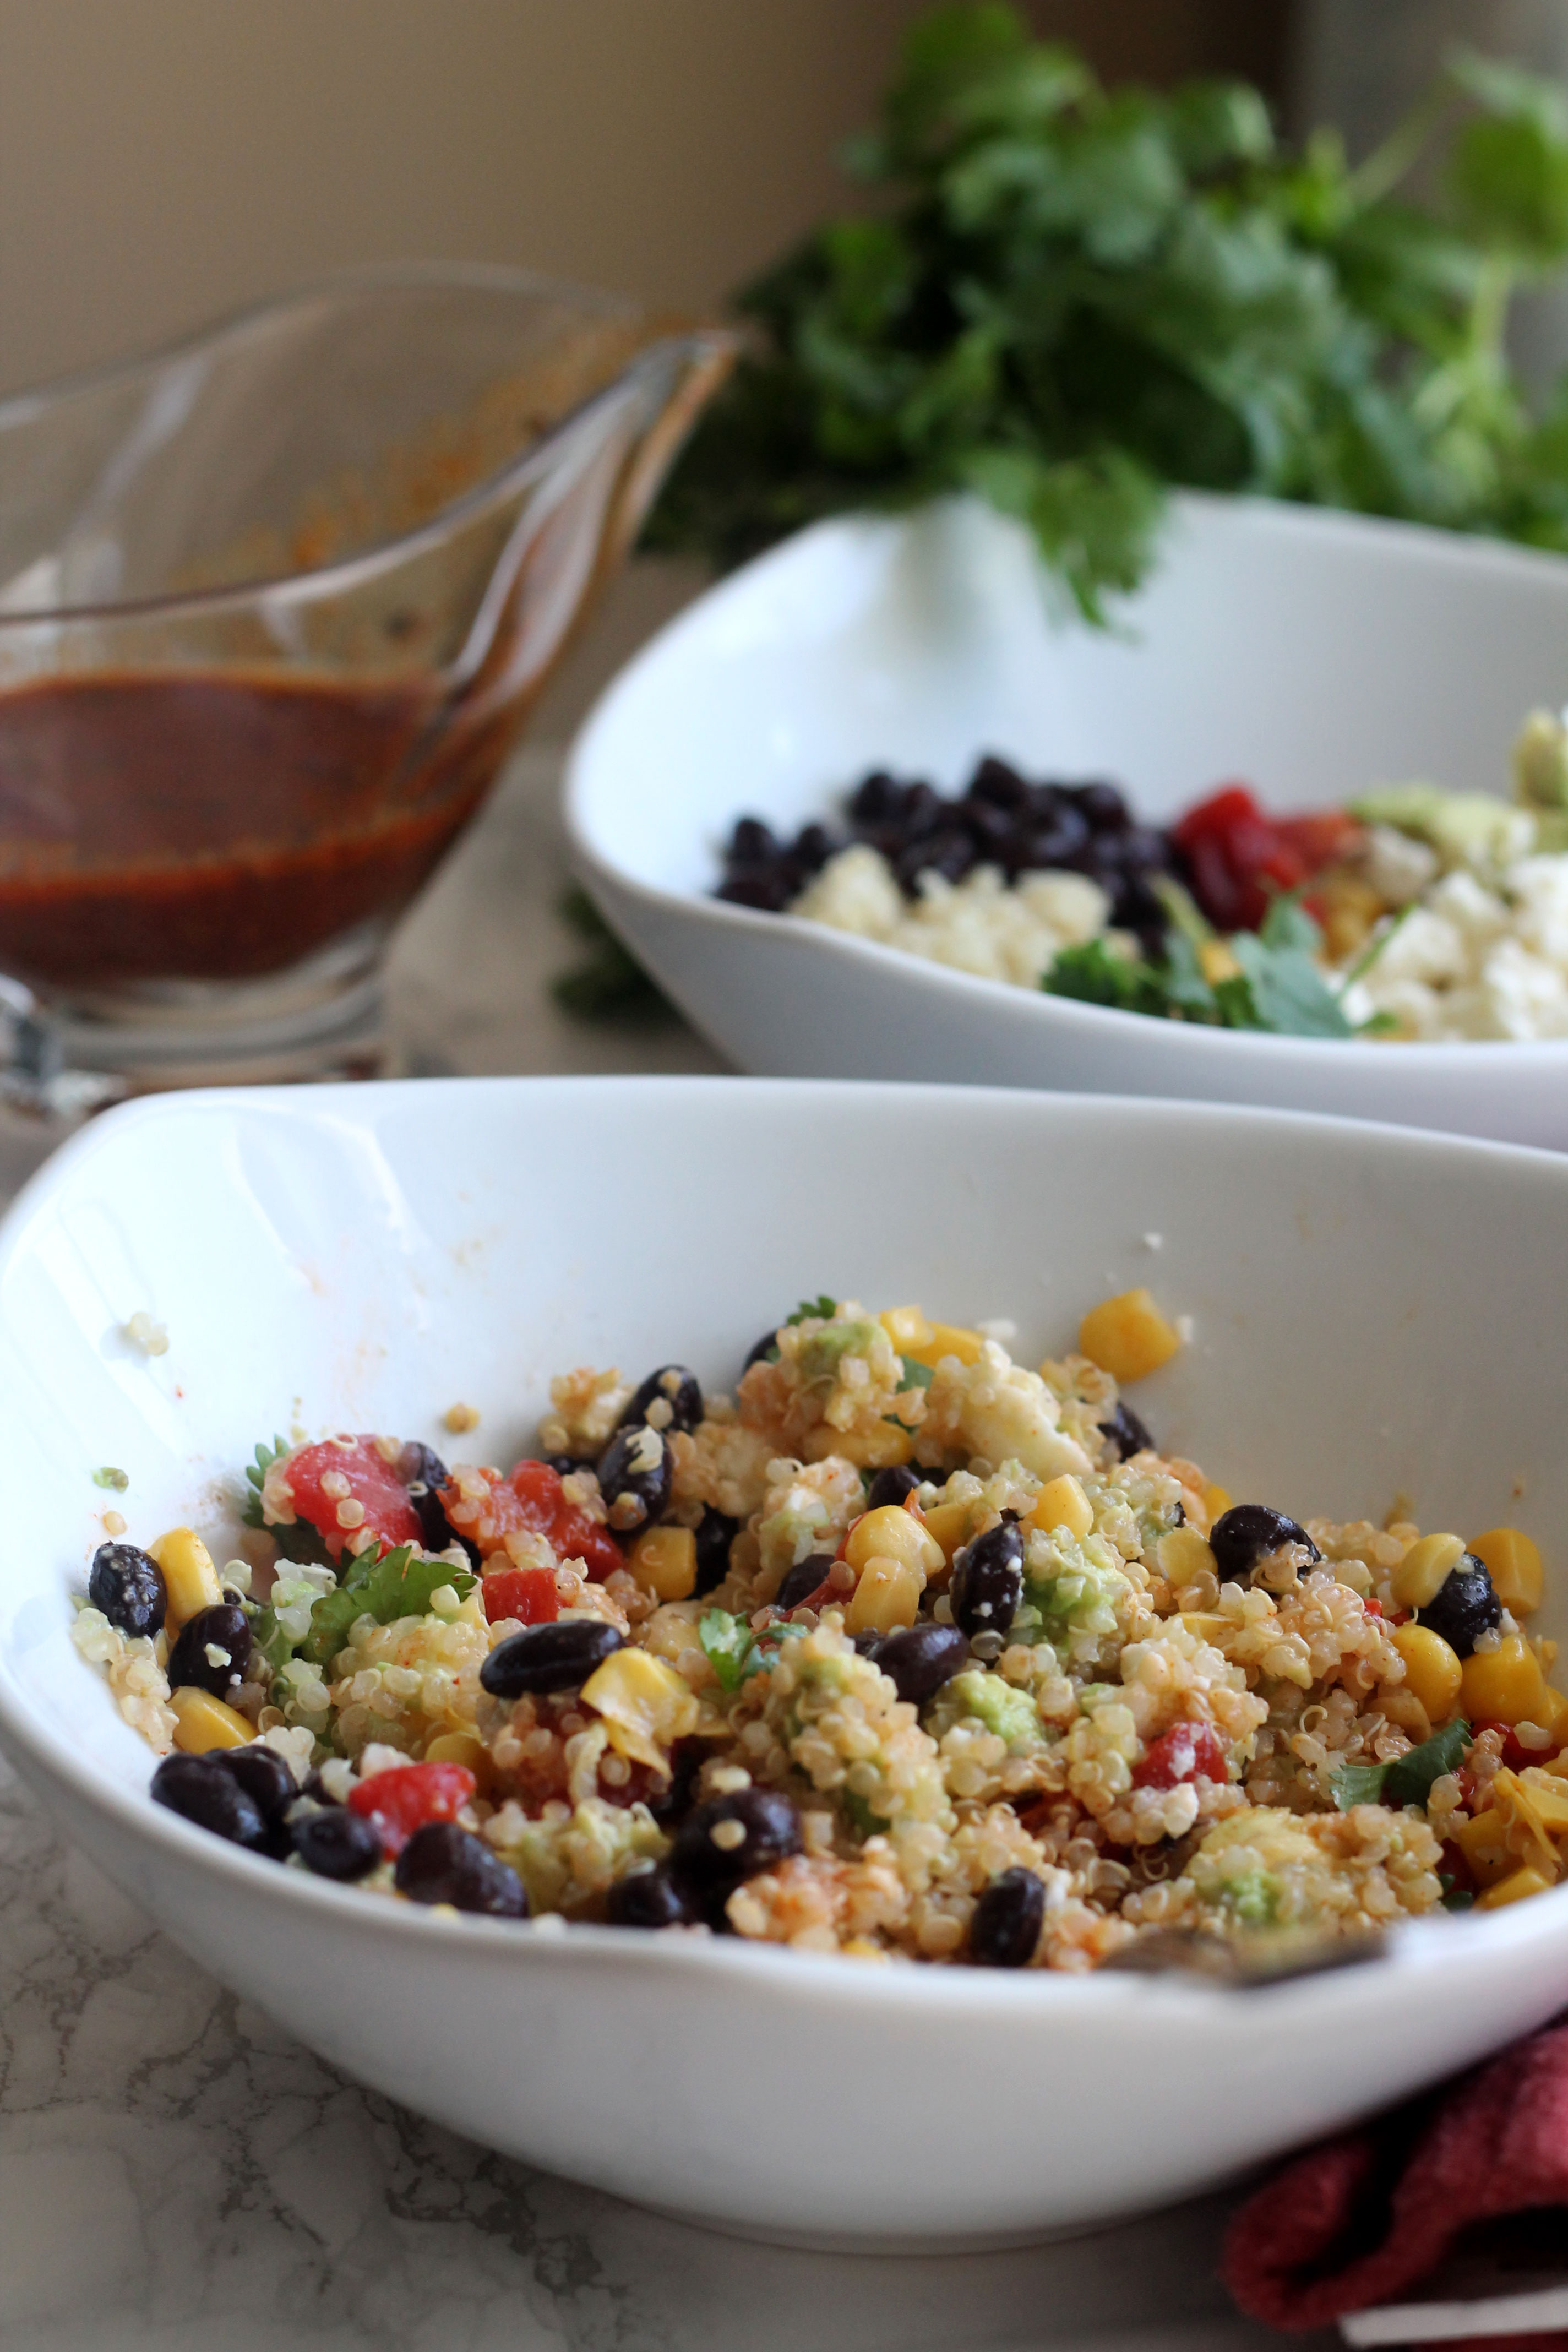 Southwestern Quinoa Bowl - veggies, beans, and cheese tossed in a smoky vinaigrette